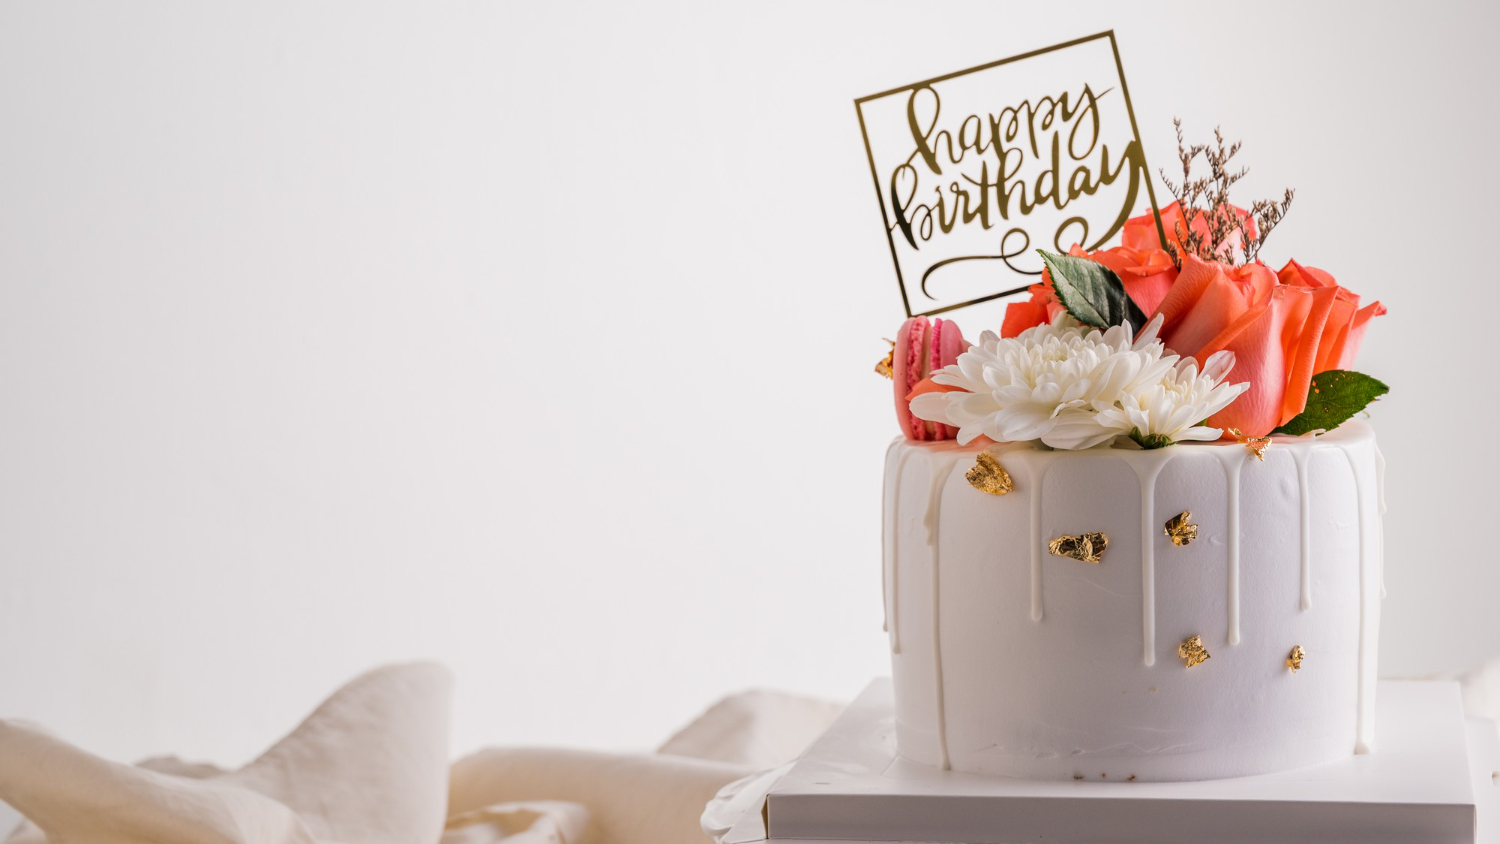 Sweet and Simple Birthday Quotes for a Female Friend